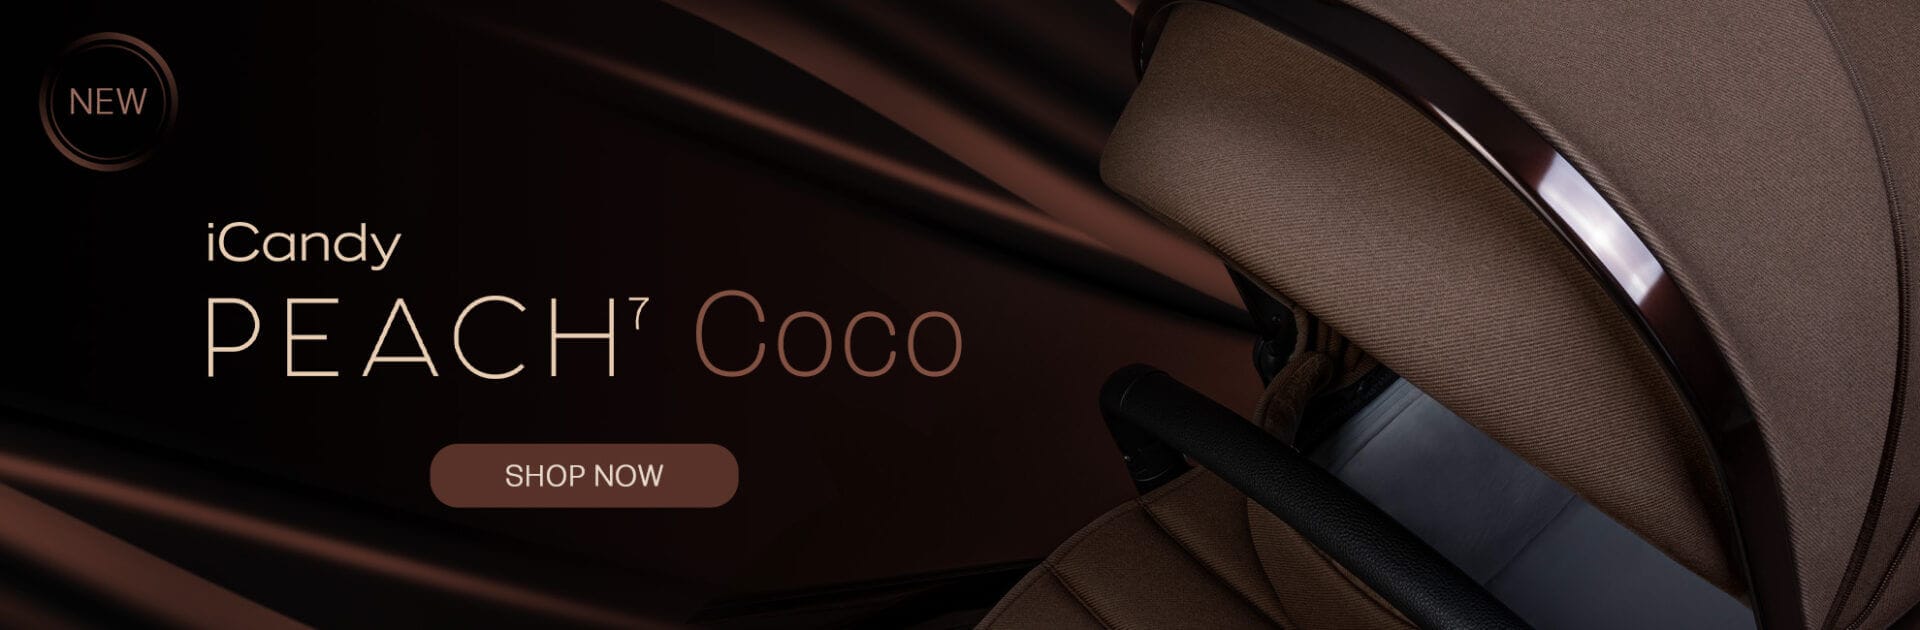 icandy peach coco web banners x